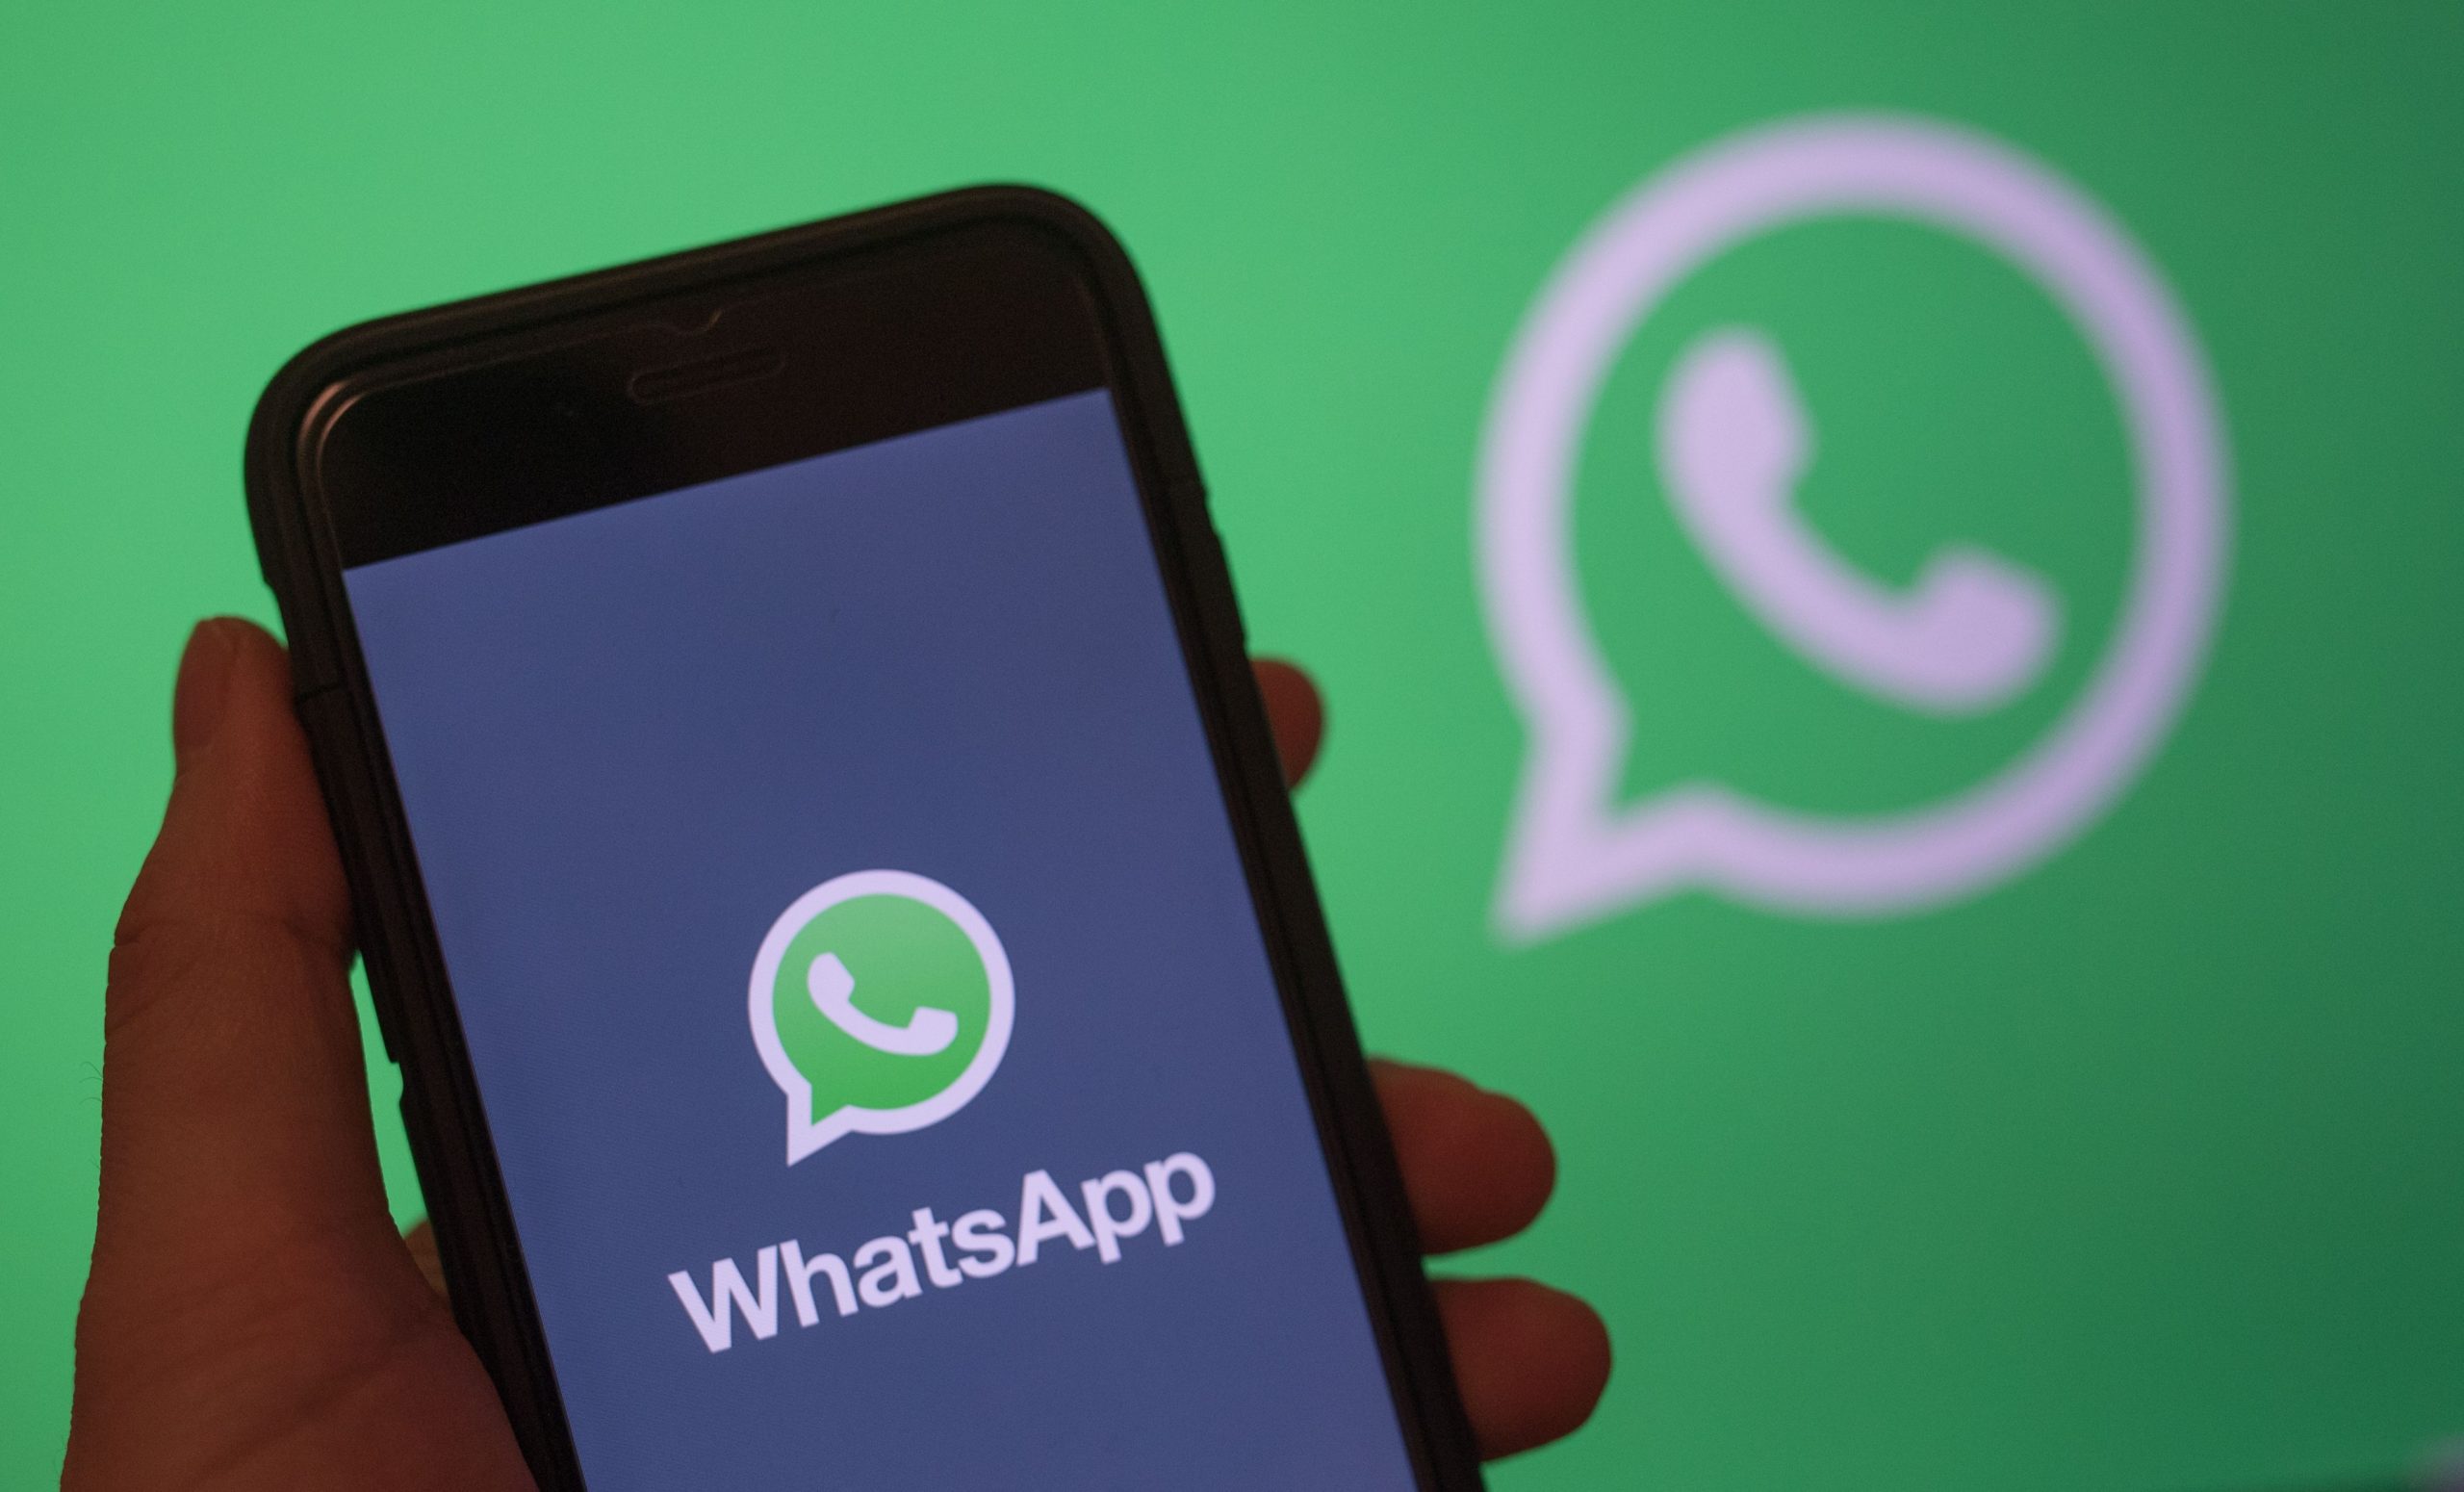 WhatsApp beta users to get Facebook messenger rooms integration